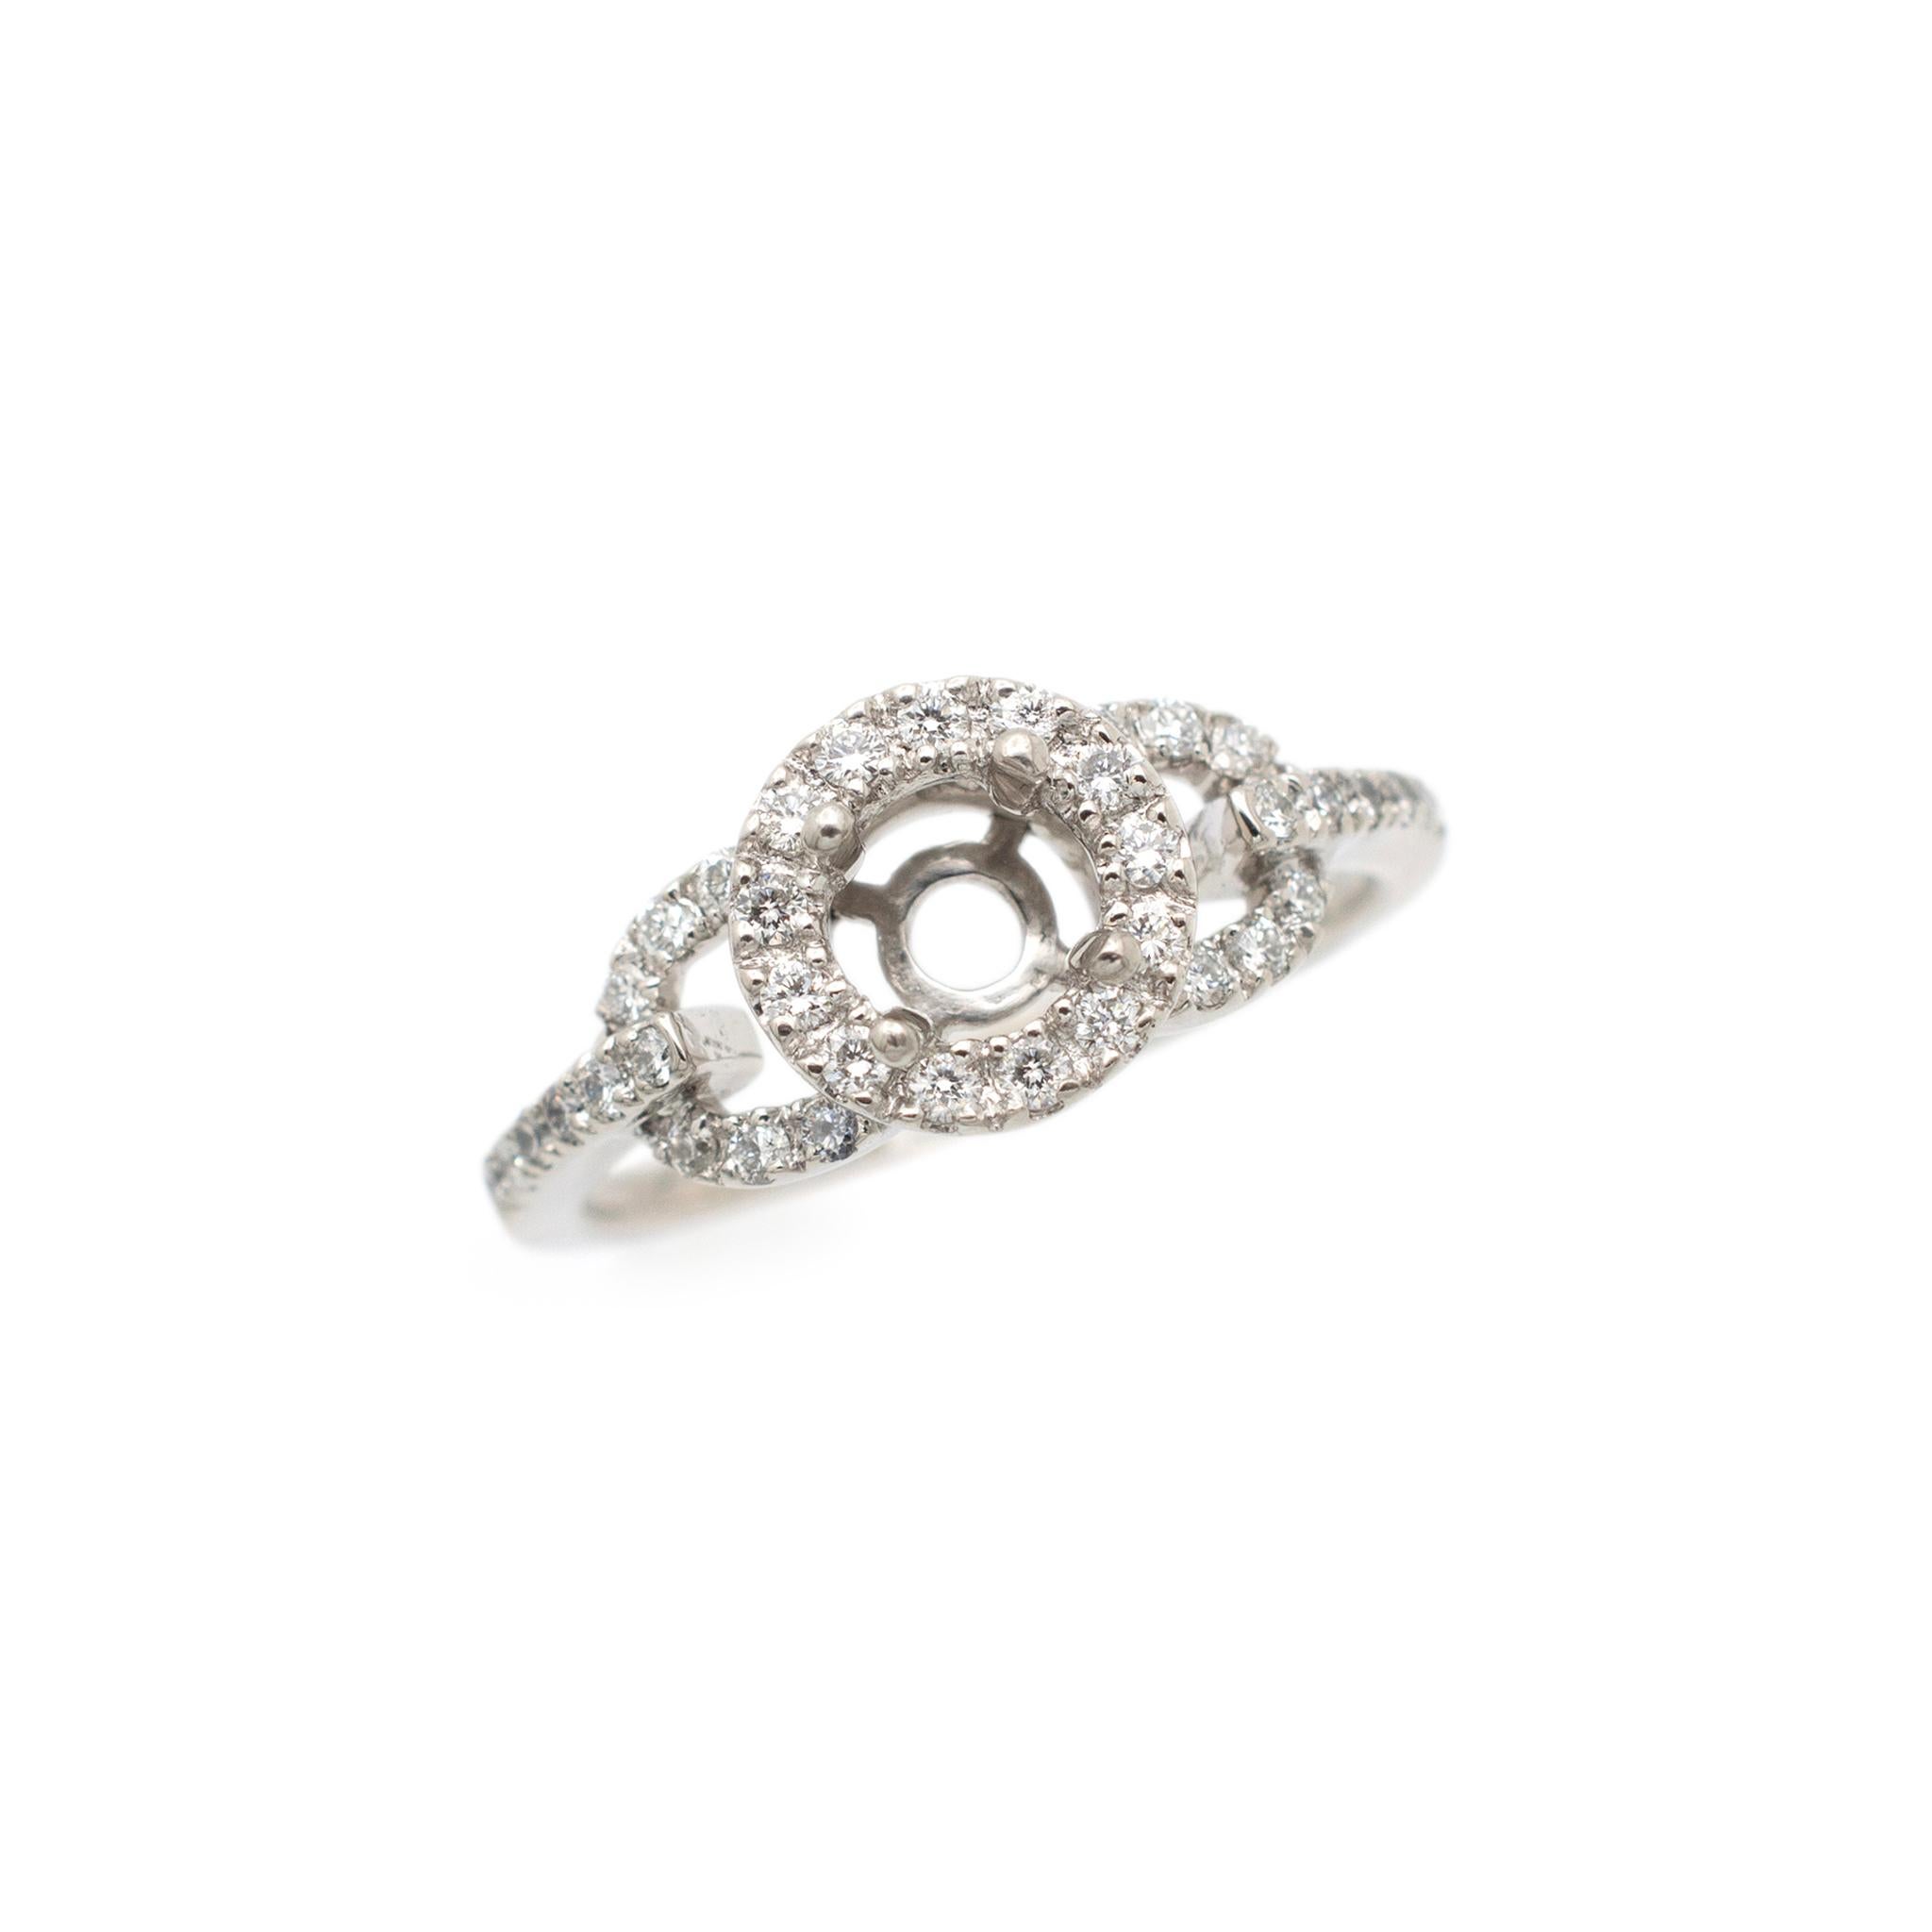 Gender: Ladies

Metal Type: Platinum

Size: 9

Shank Maximum Width: 1.75 mm

Weight: 6.60 grams

Ladies platinum diamond halo accented semi-mount engagement ring with a half round shank. The metal was tested and determined to be platinum.
The